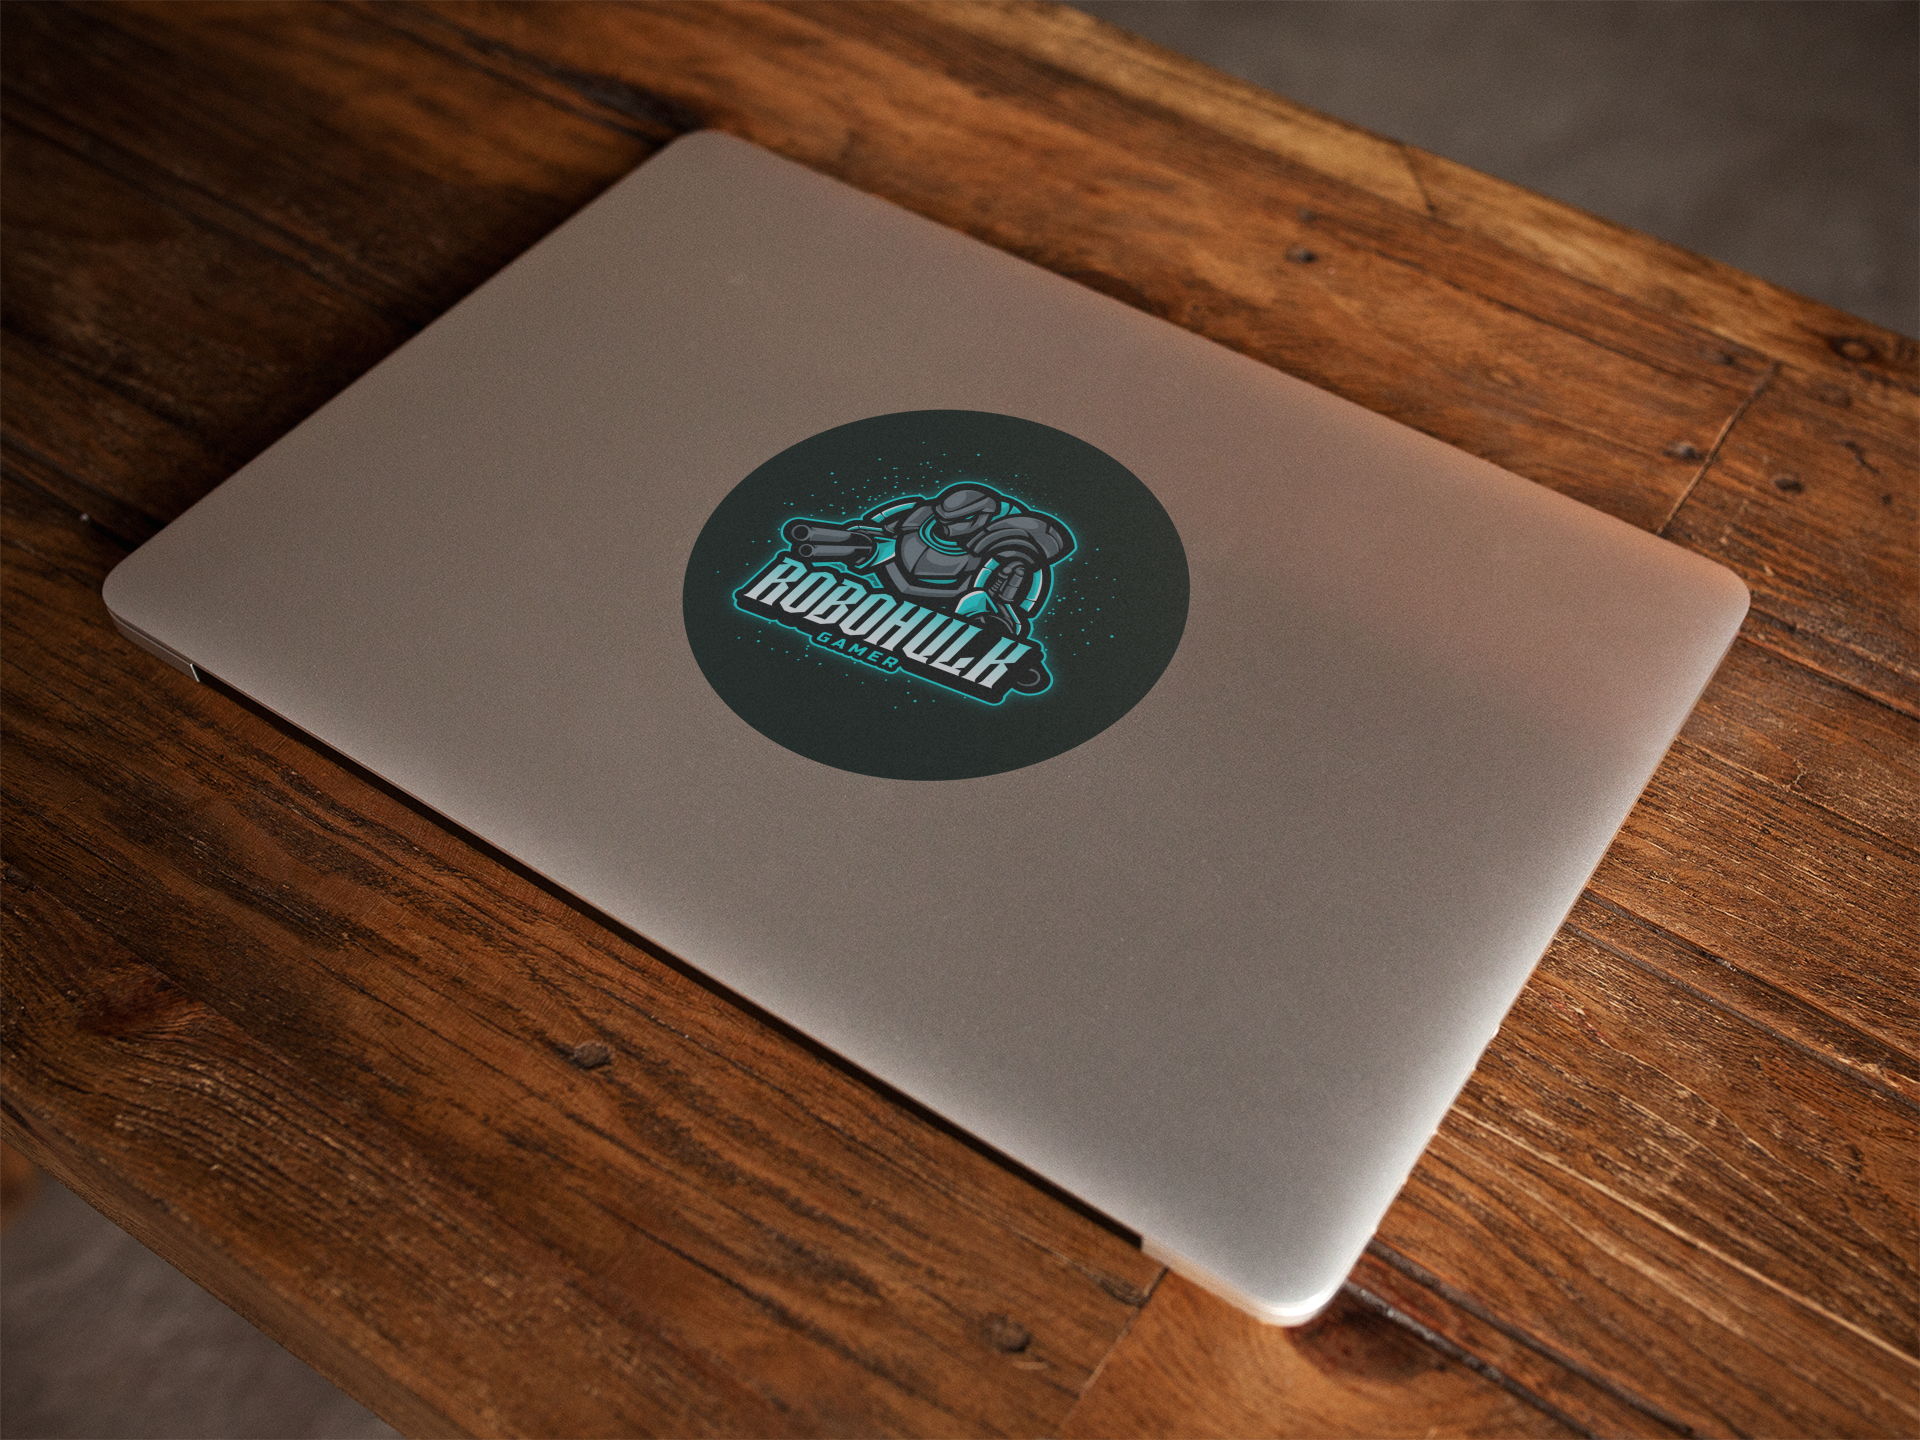 sticker-on-a-closed-macbook-over-a-wooden-surface-template-a14334